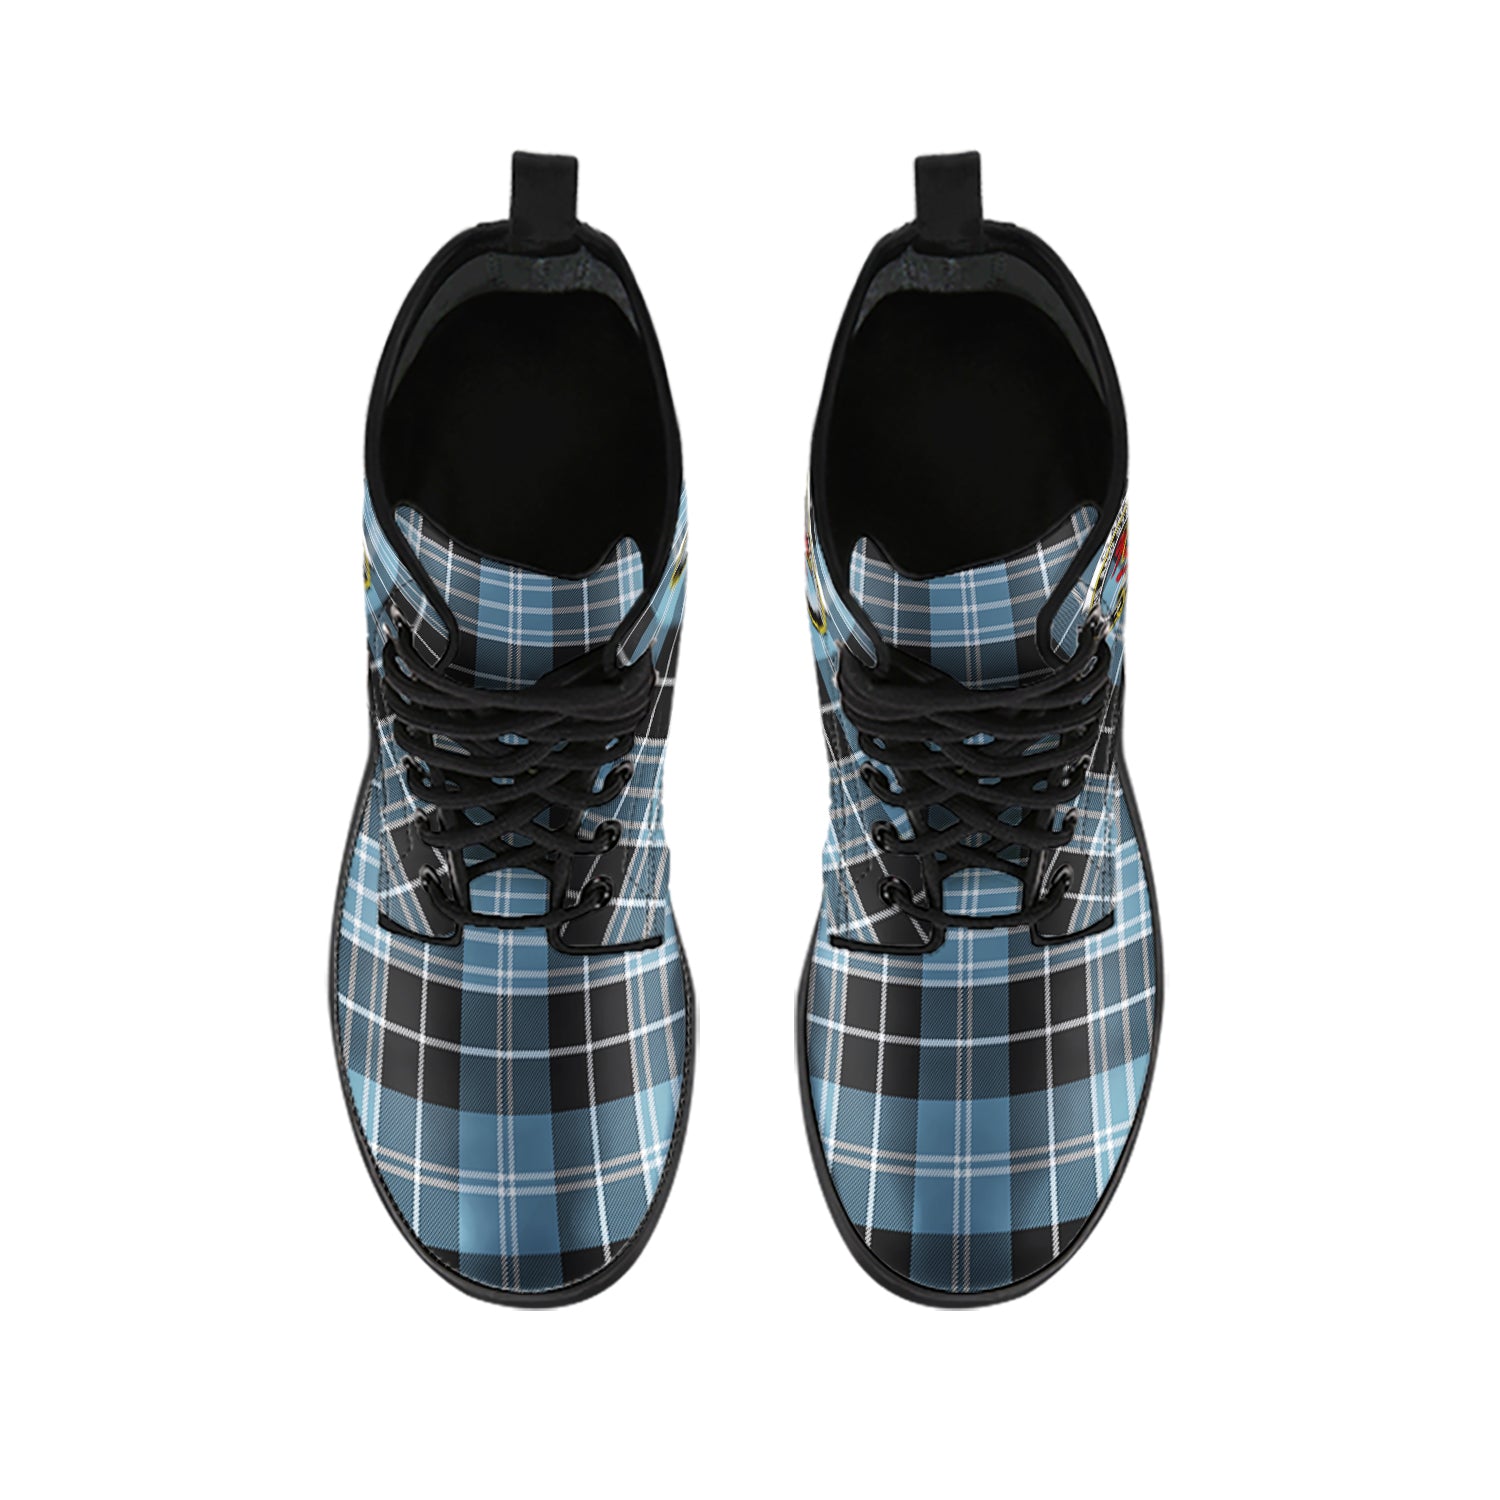 clark-ancient-tartan-leather-boots-with-family-crest